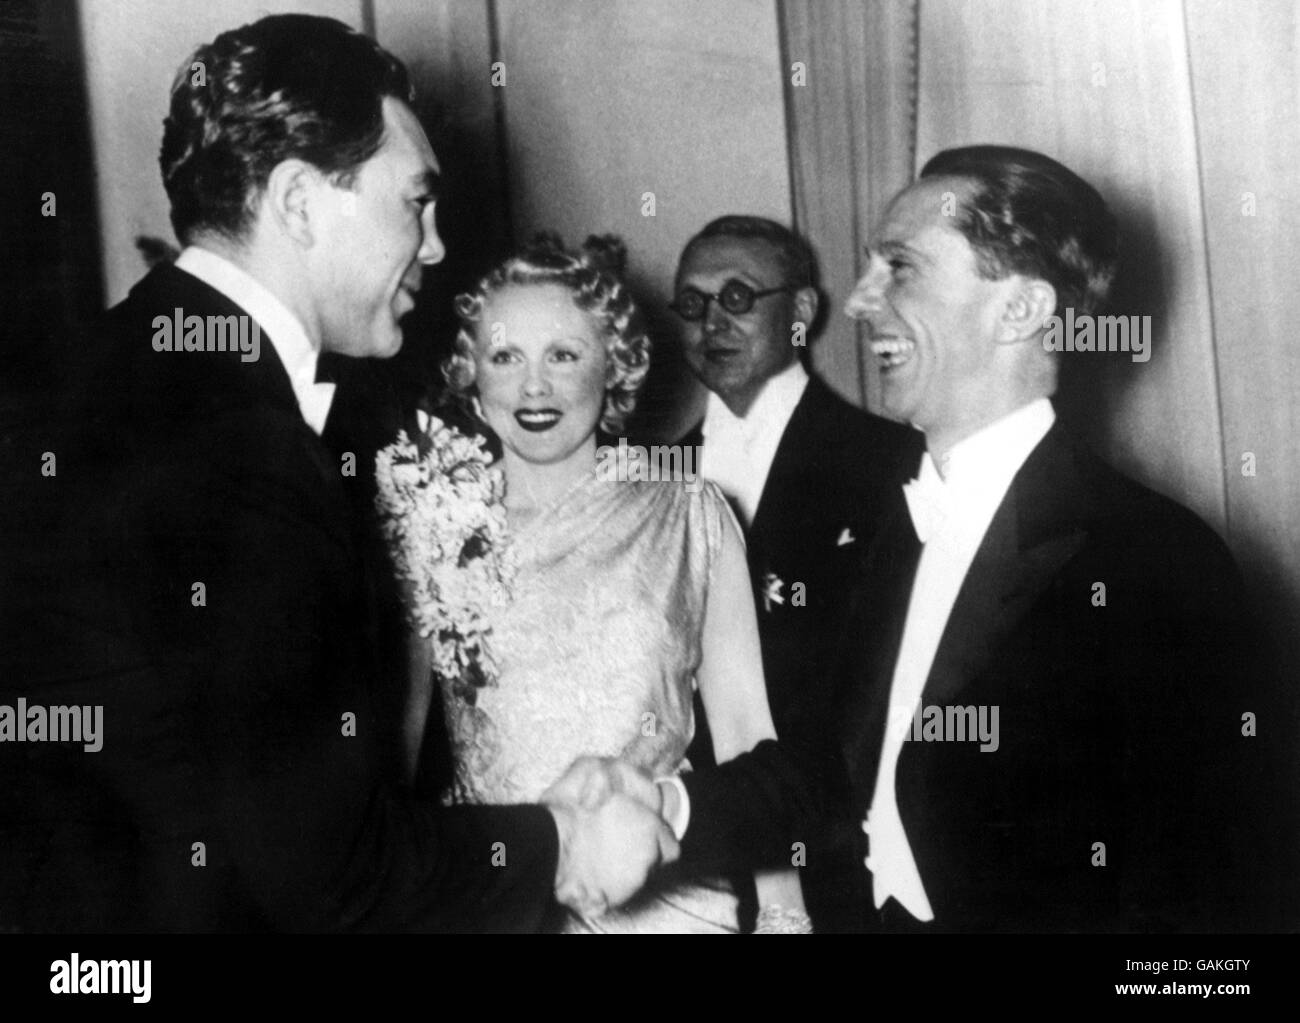 Former World Heavyweight Champion Max Schmeling (l) shakes hands with Nazi Propaganda Minister Joseph Goebbels (r) at a reception thrown by Dr Goebbels in Berlin on the occasion of the German Motor Show. Looking on is Schmeling's actress wife, Anny Ondra (c) Stock Photo